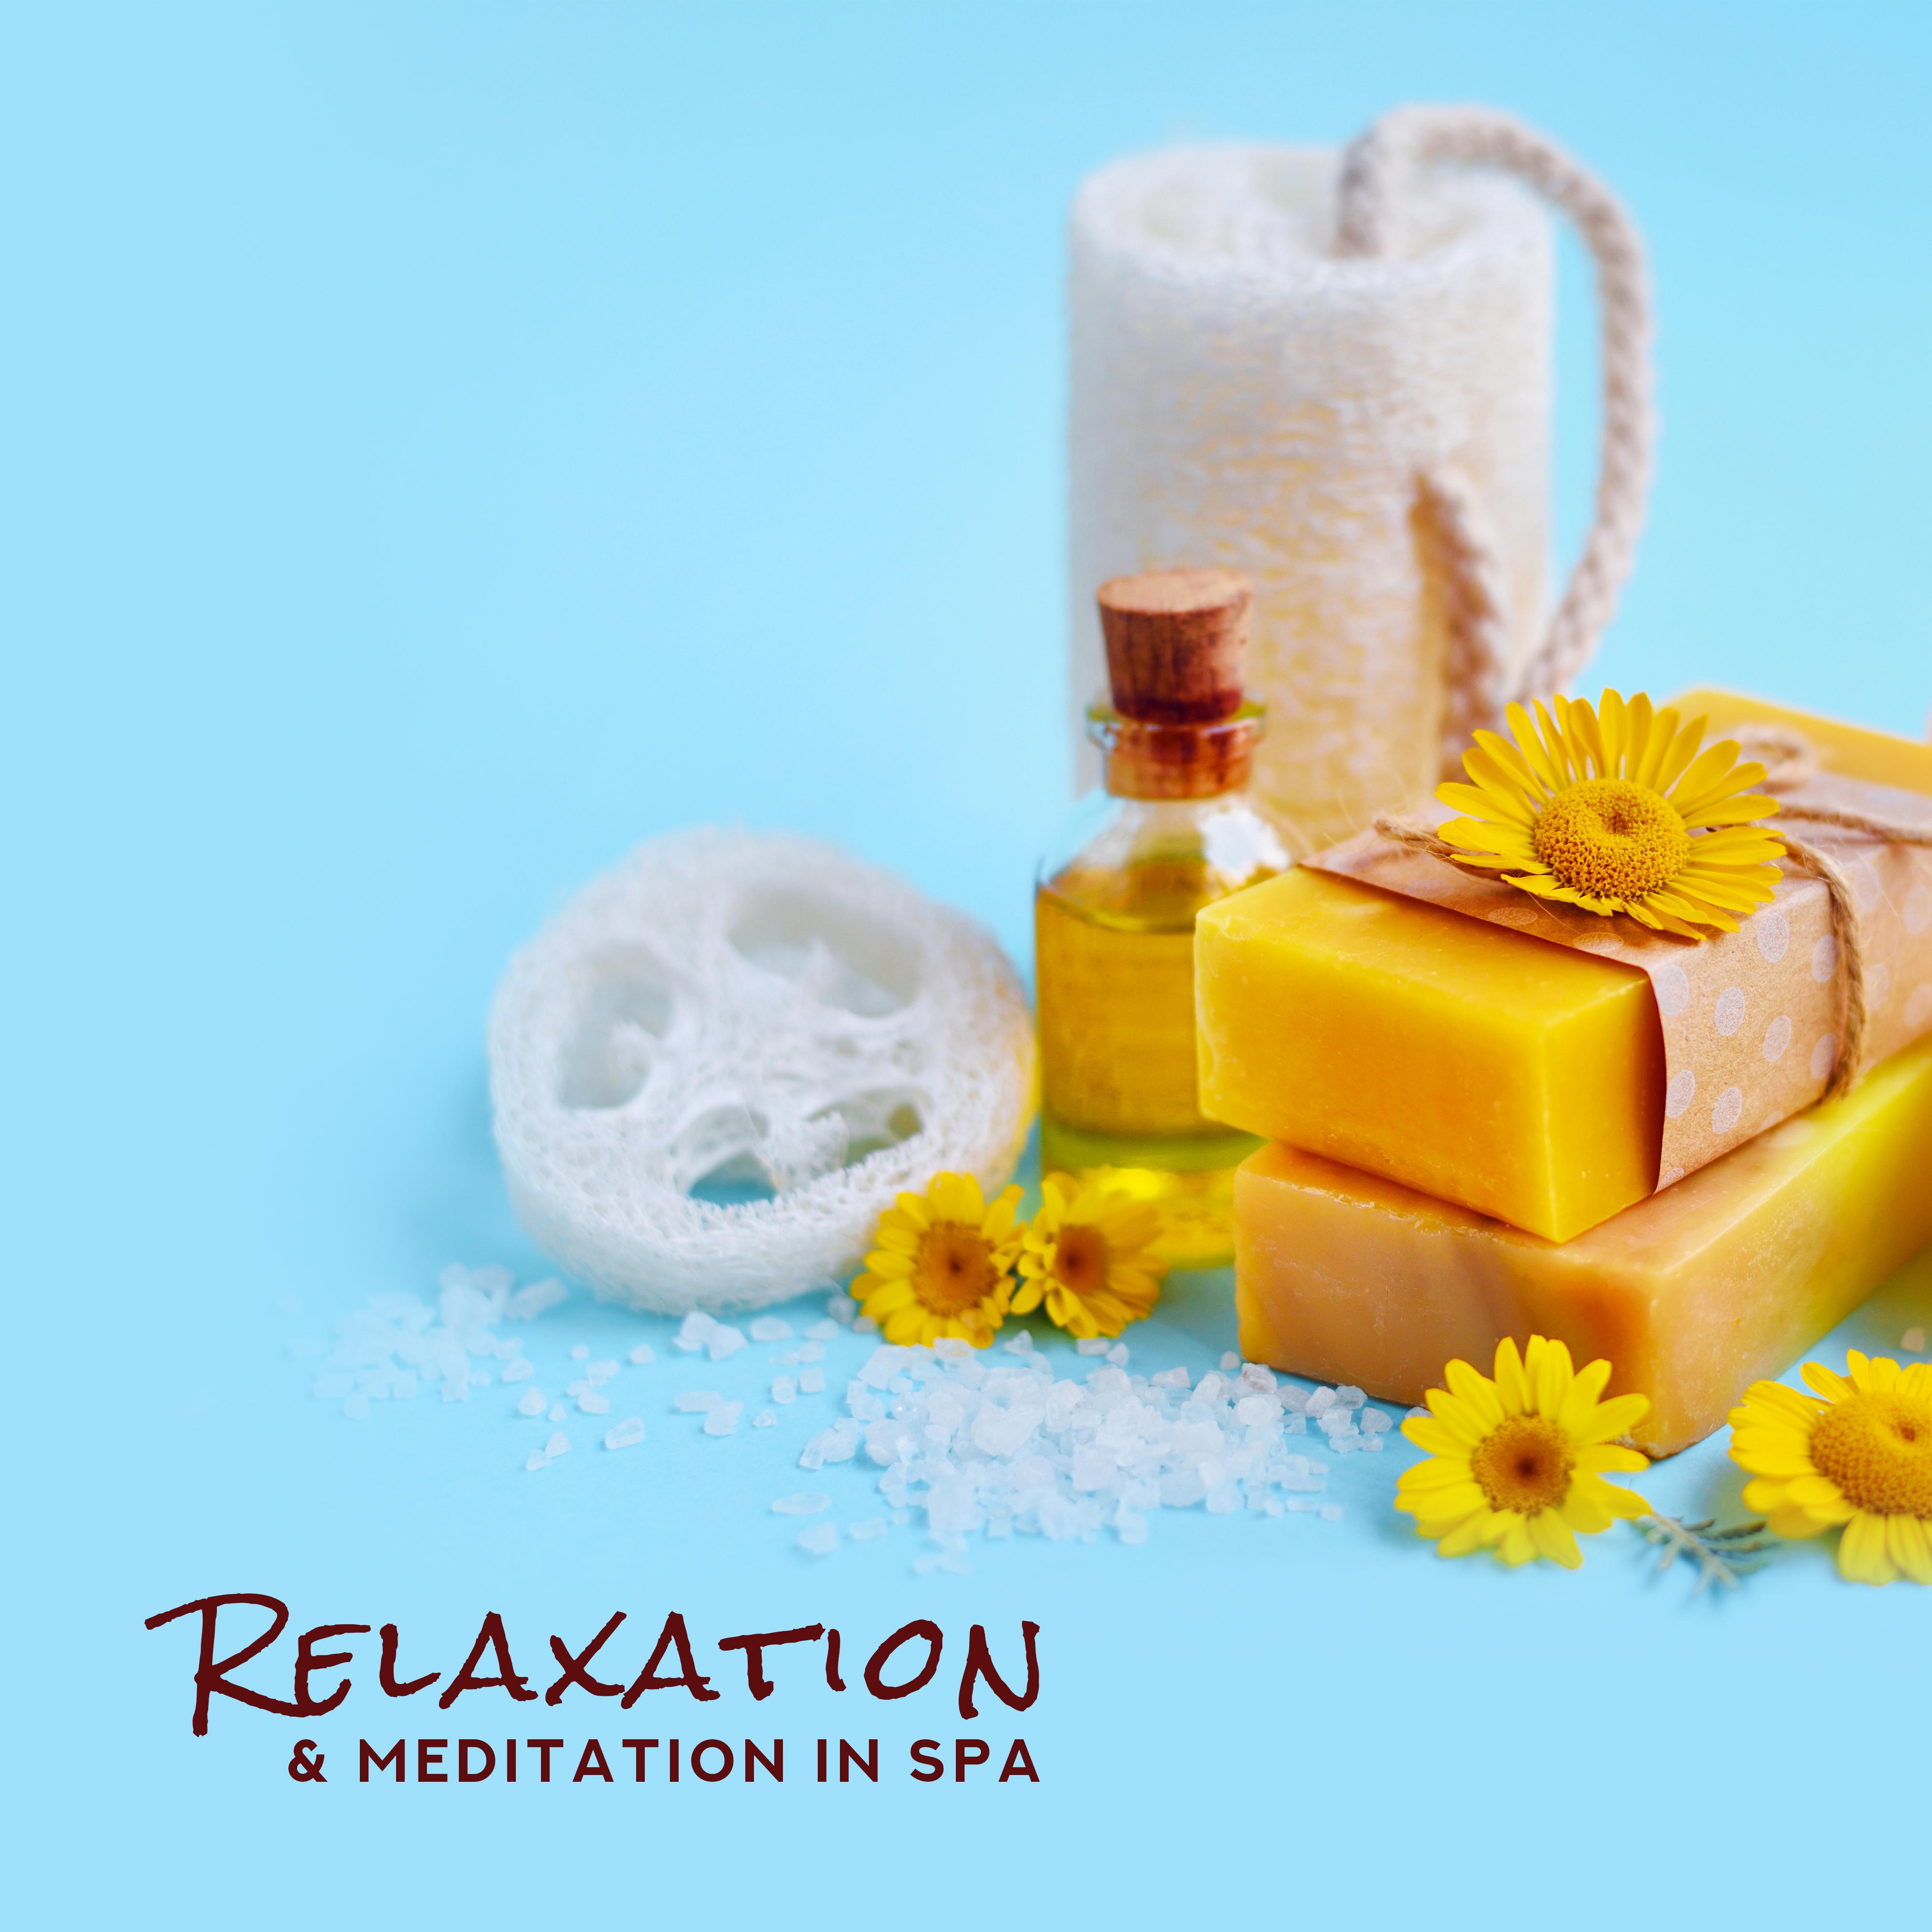 Relaxation & Meditation in Spa: 2019 New Age Music Compilation for Spa Salon, Soothing Ambient & Nature Sounds for Wellness, Sauna, Hot Oil Massage Therapy, Hot Bath